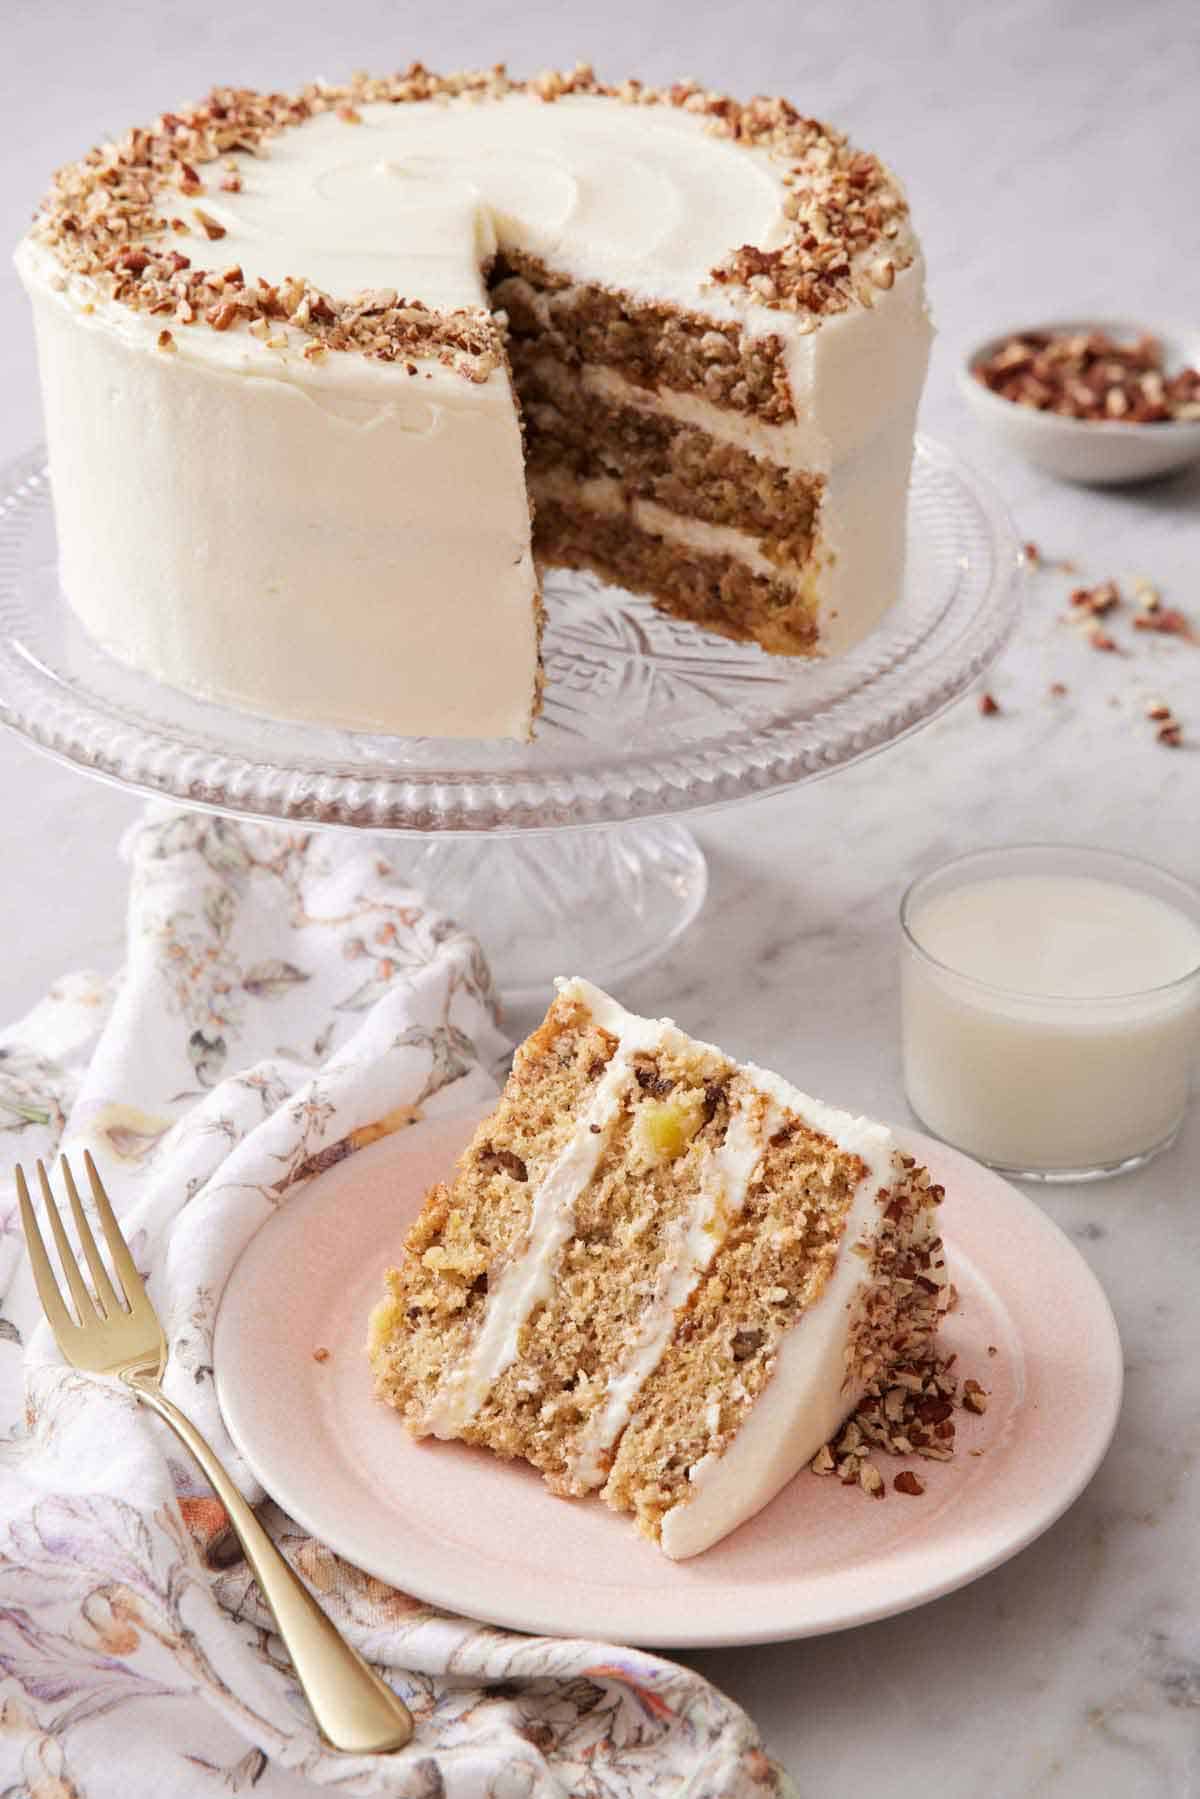 A slice of hummingbird cake on a plate with a cake stand with the rest of the cake in the background along with a glass of milk.